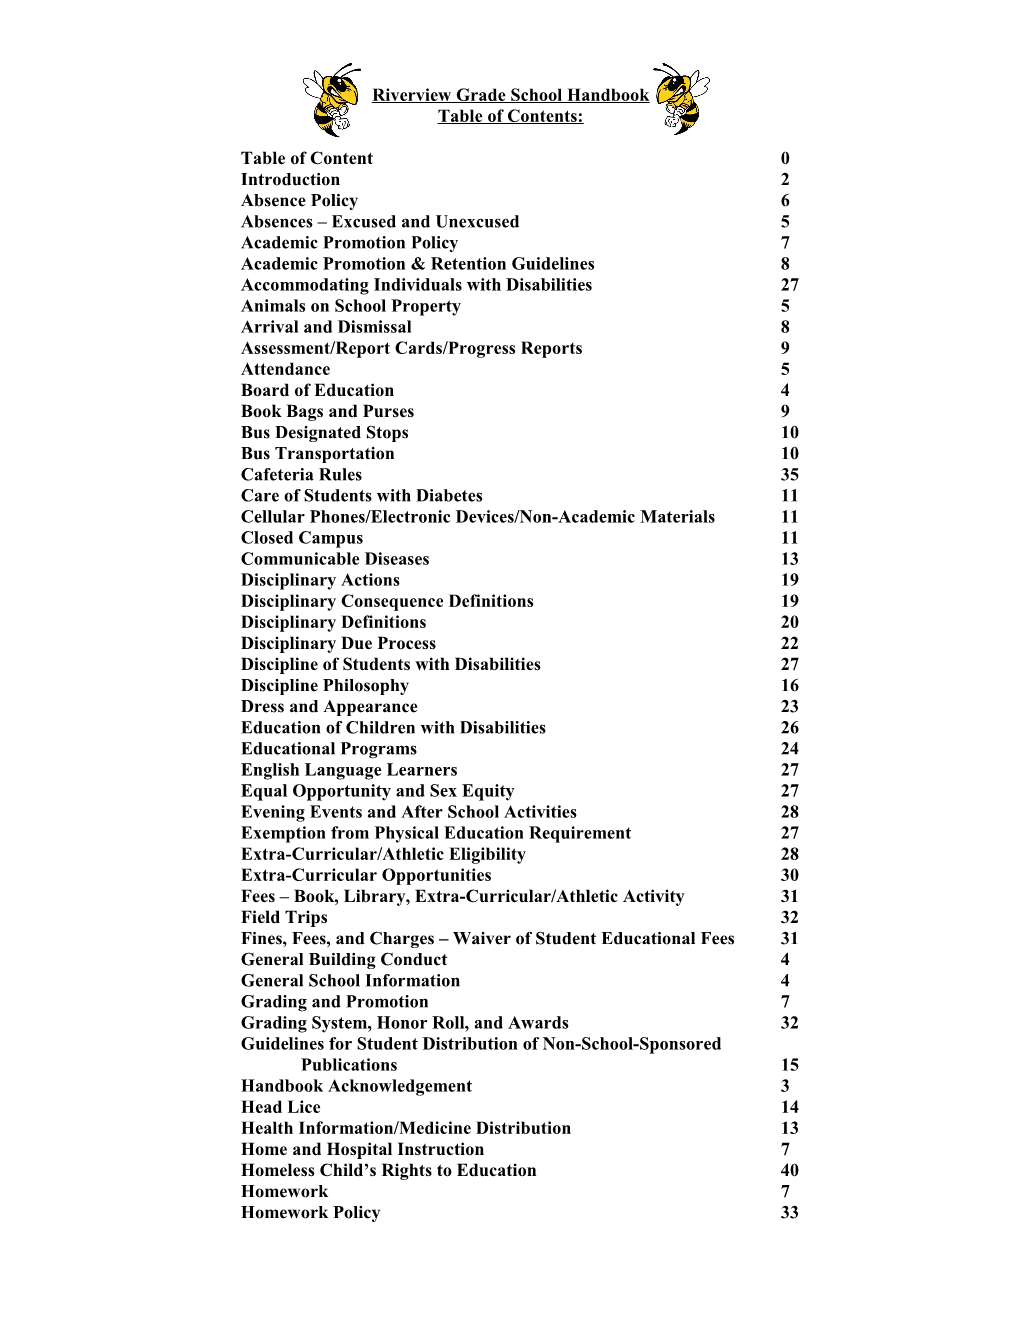 Table of Contents s187